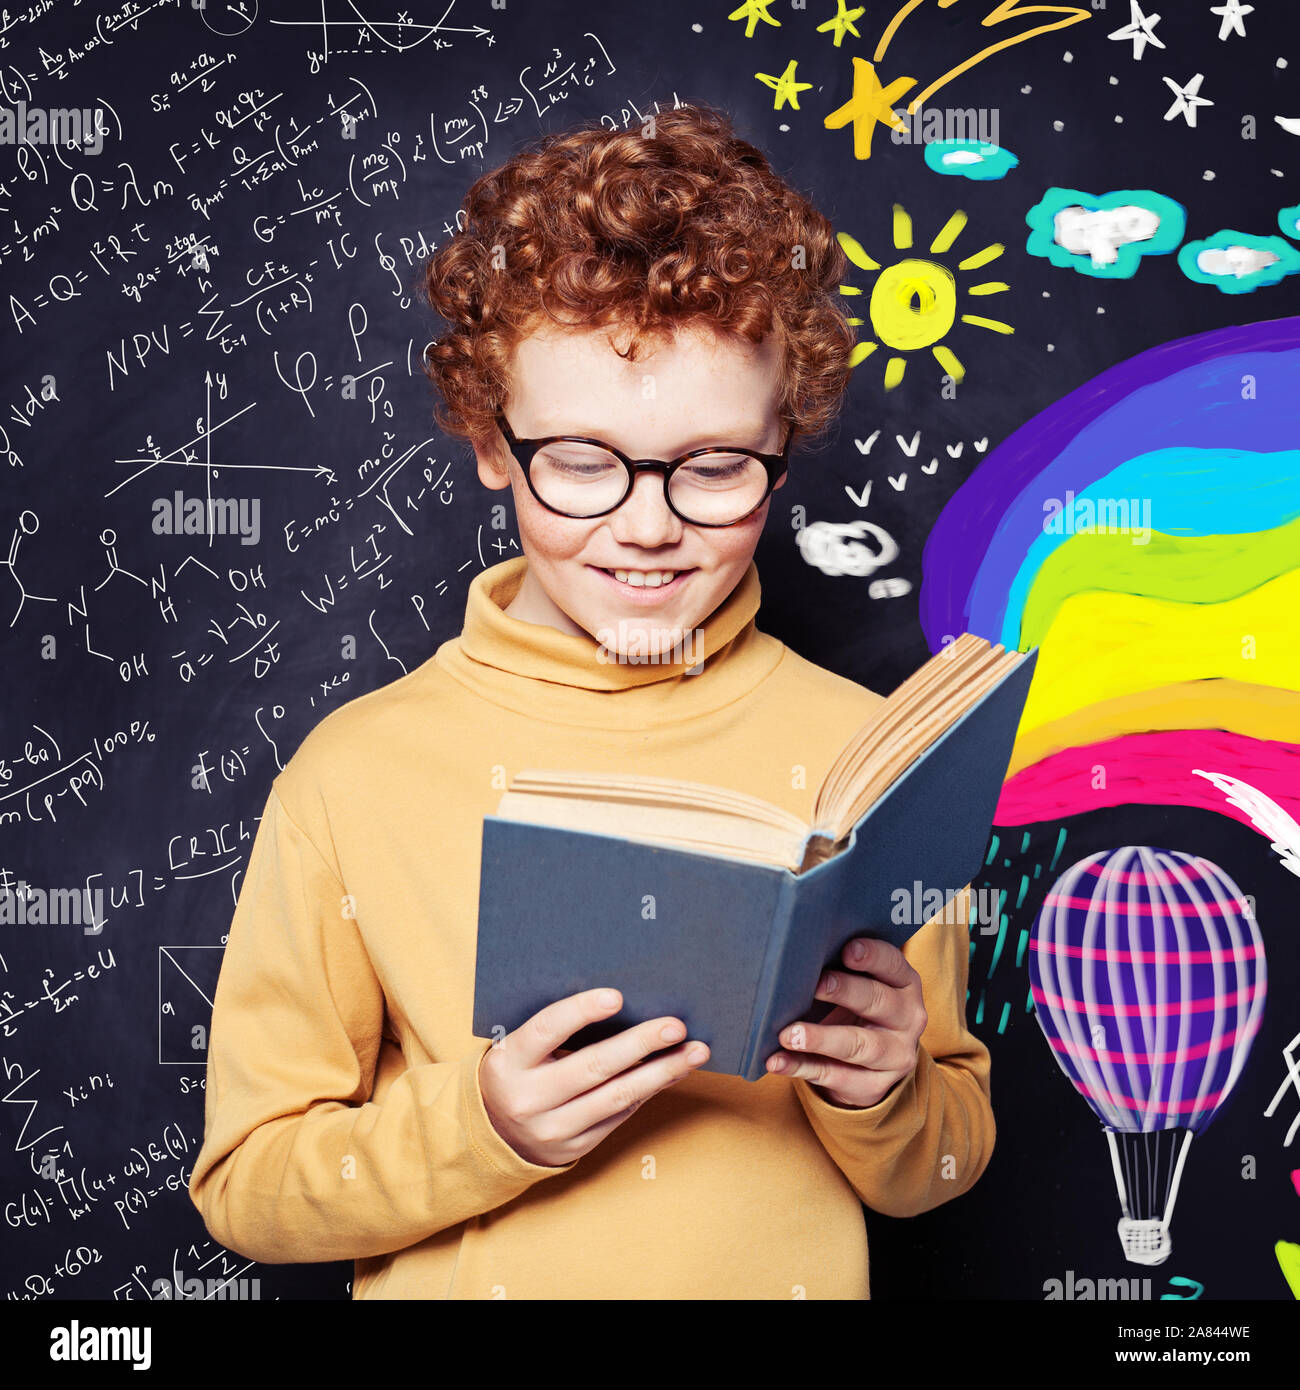 Imagination and creativity concept. Kid reading a book on fantasy background Stock Photo